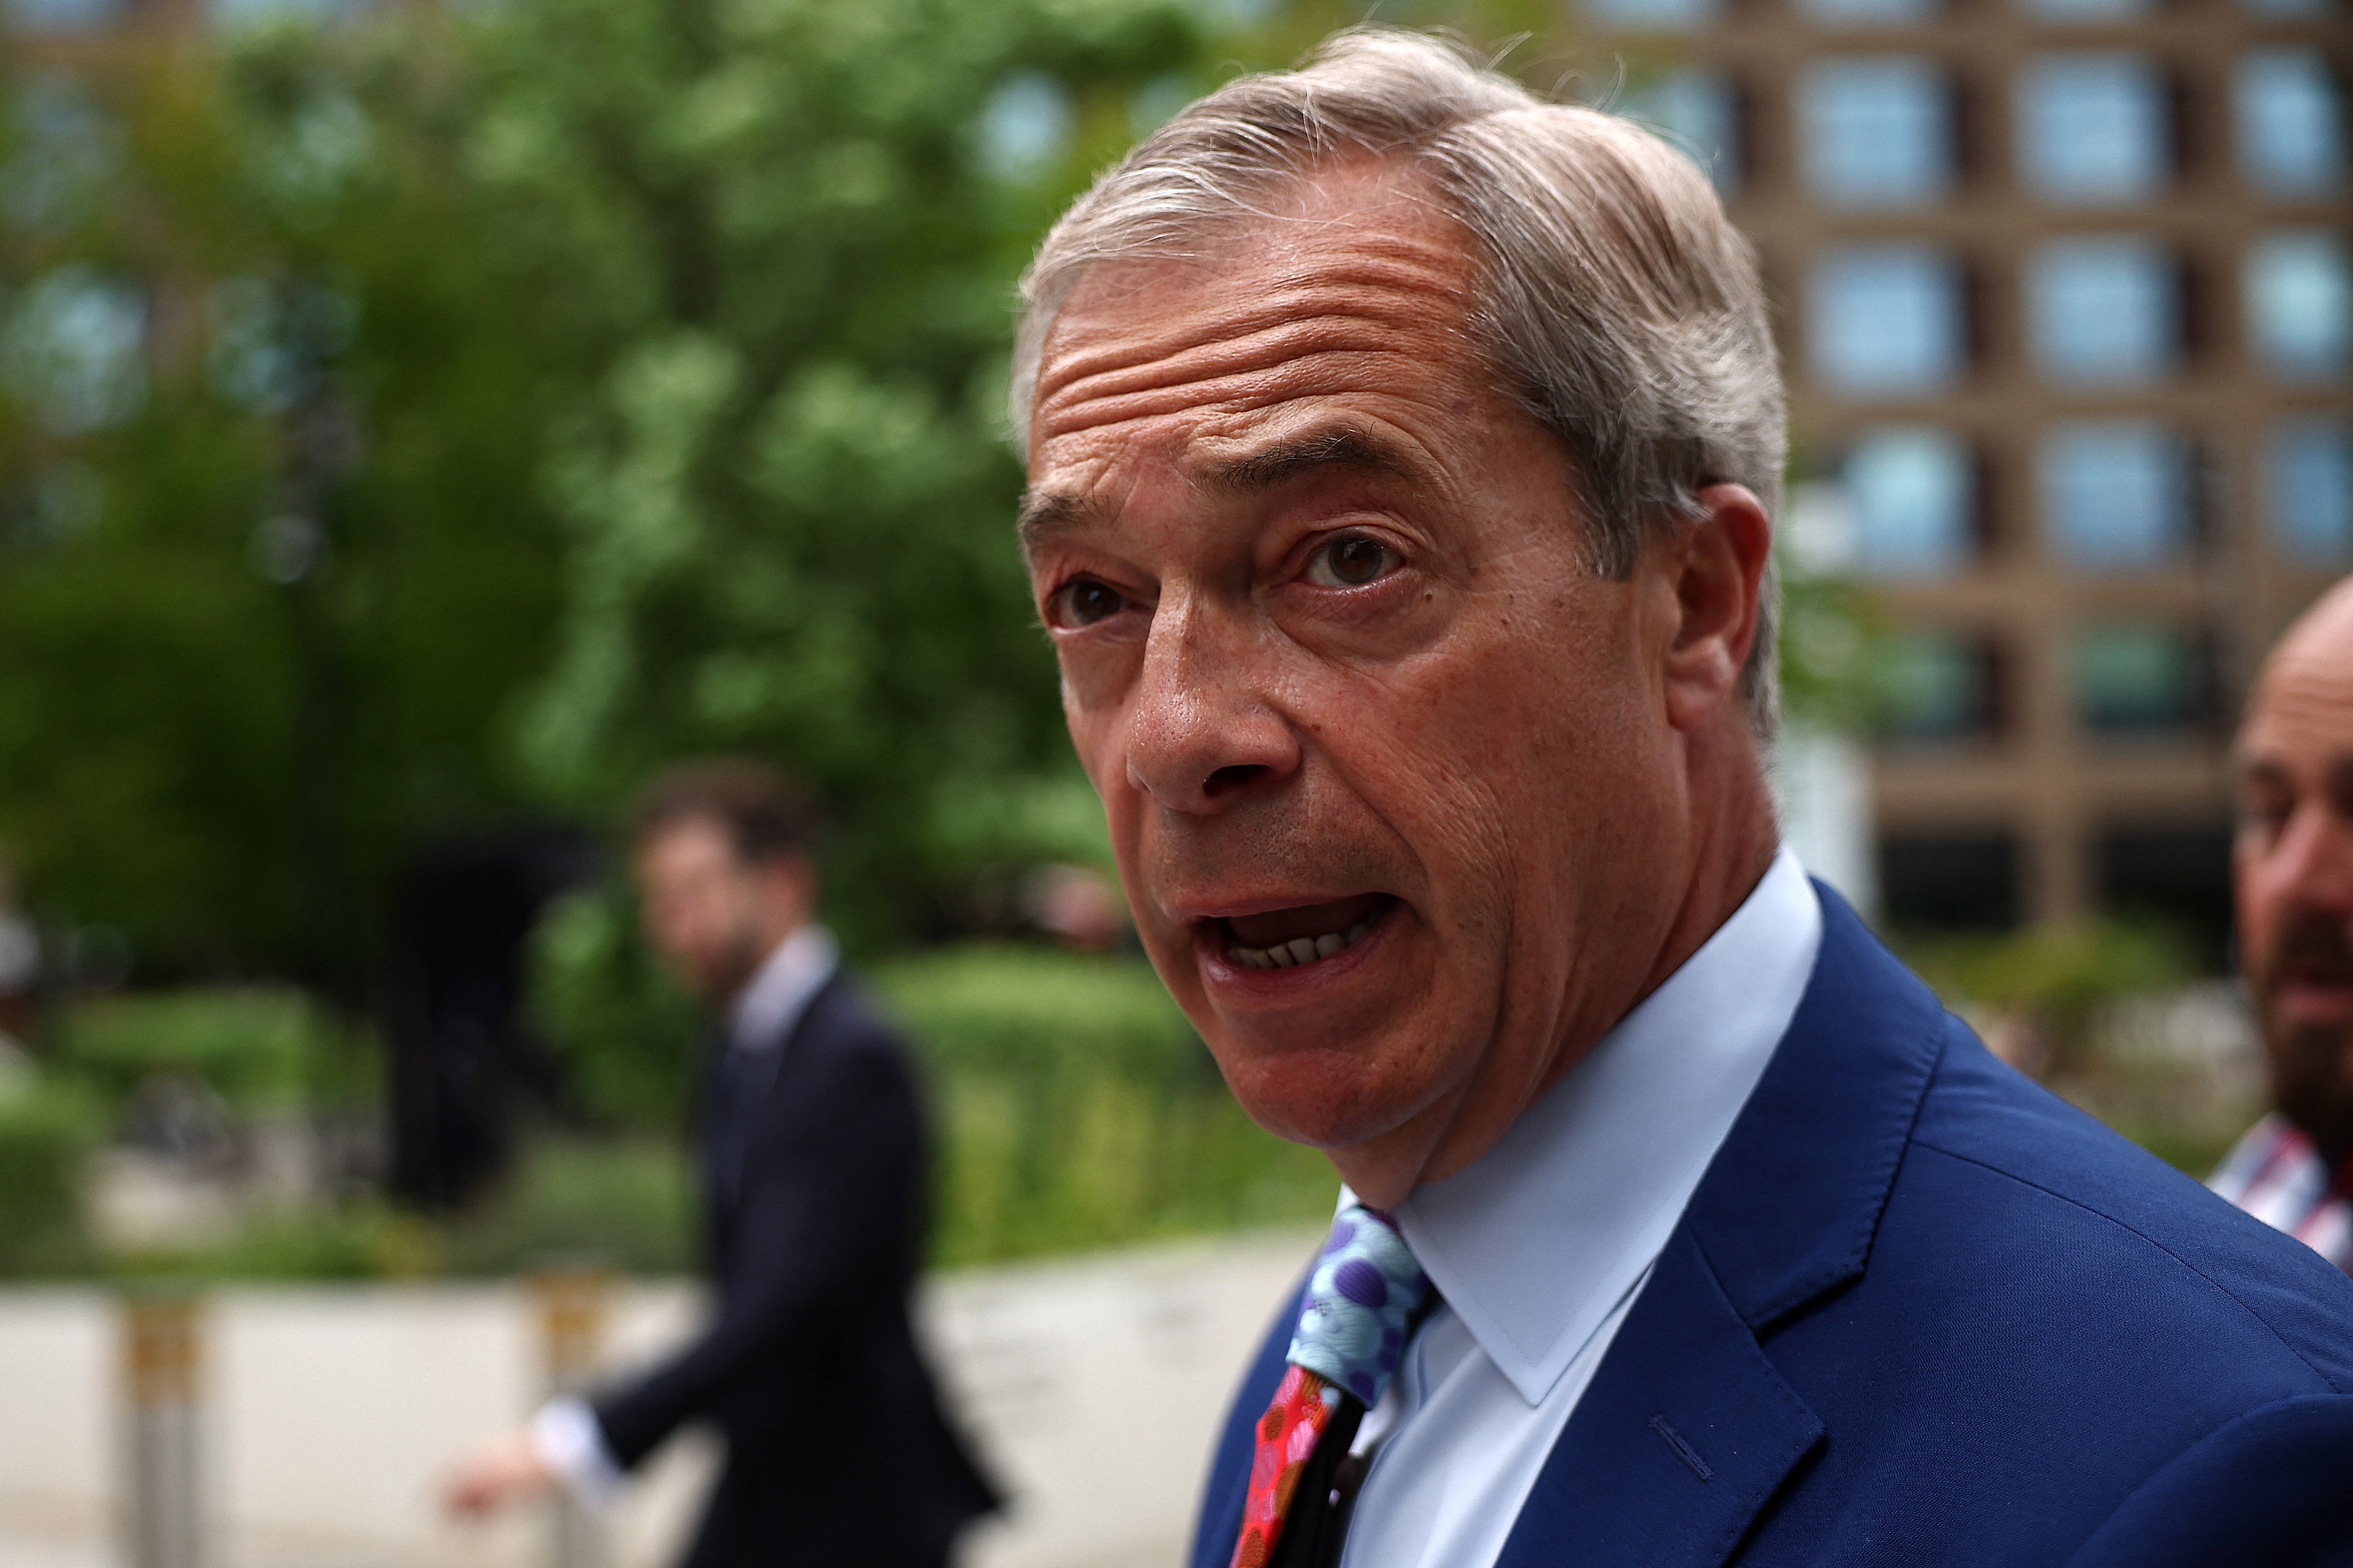 Nigel Farage said he was ‘dismayed’ by the ‘appalling sentiments’ made by Reform UK canvassers